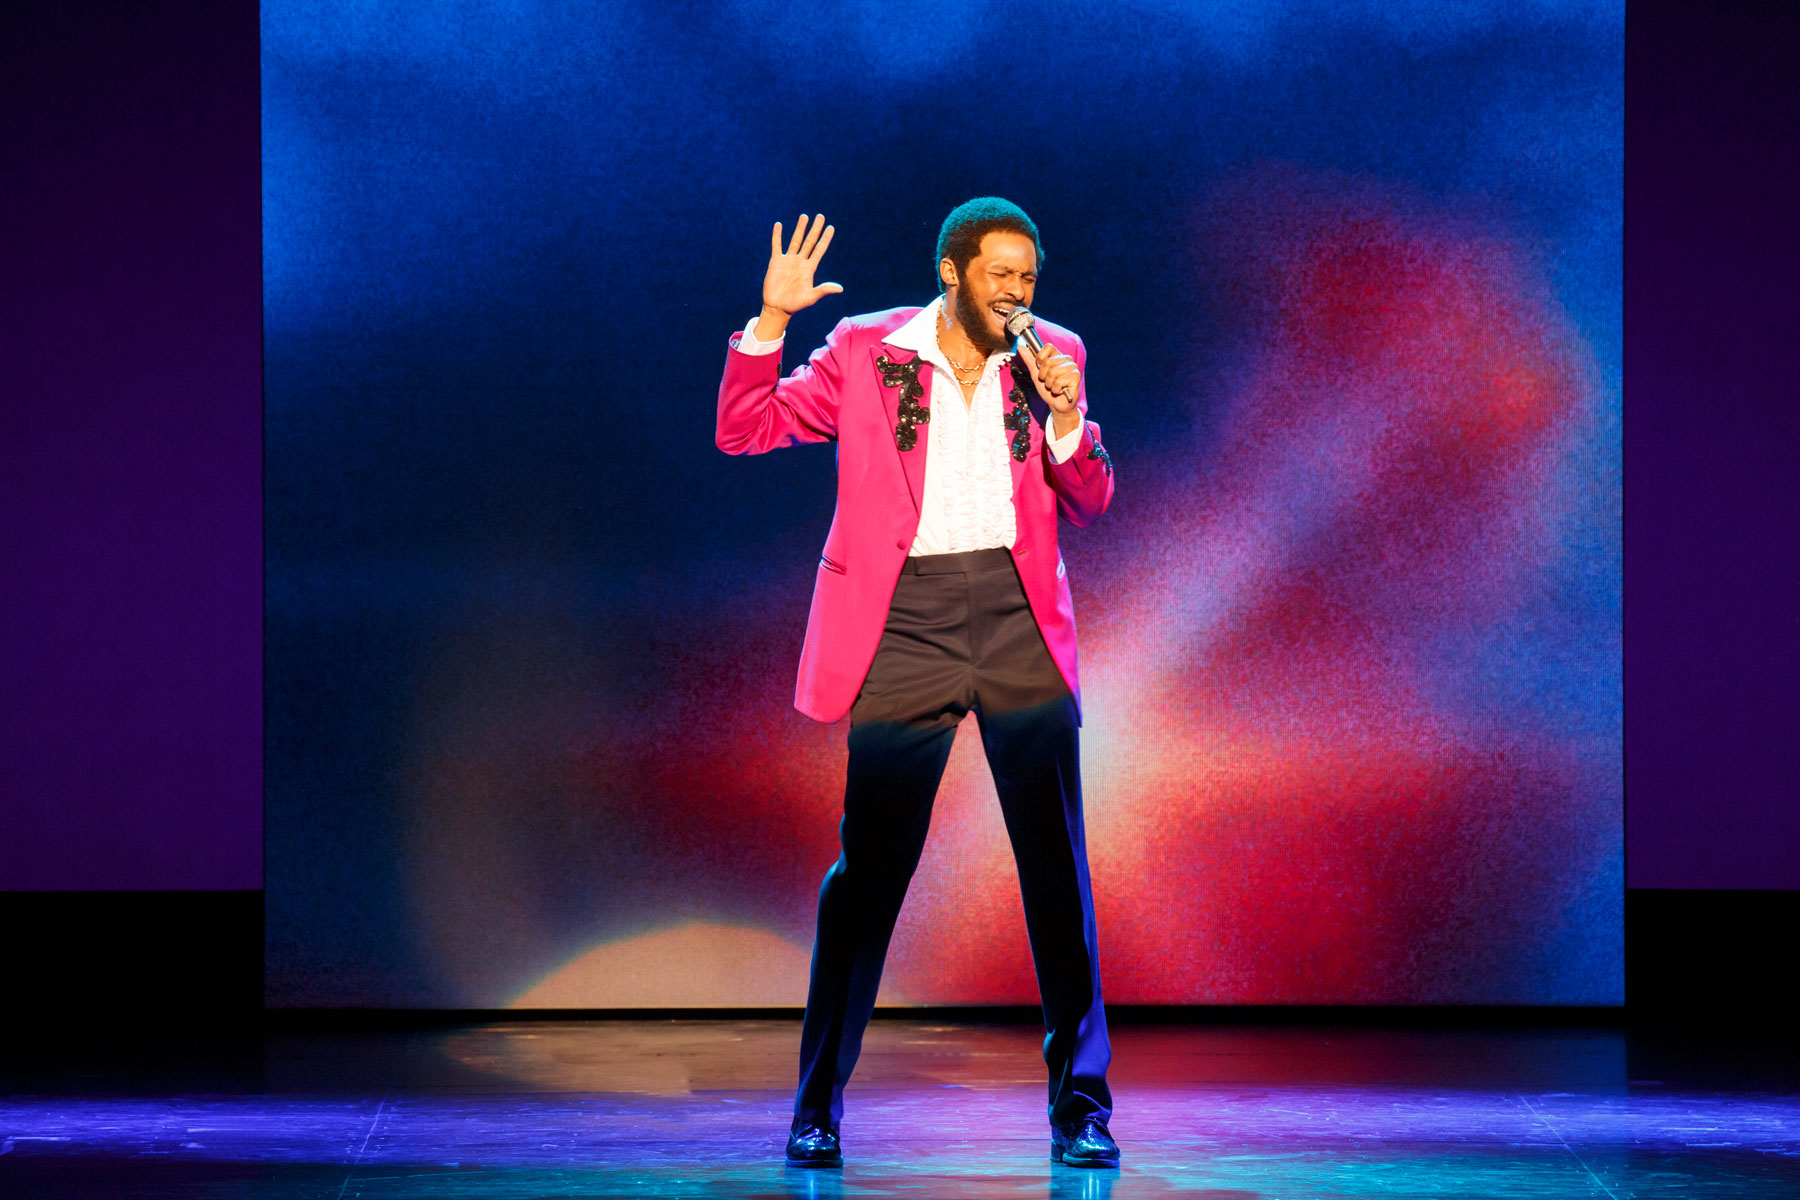 Jarran Muse portrayed legendary Motown recording artist Marvin Gaye in “Motown: The Musical,” playing May 30-June 11 in Philly. (Photograph courtesy of Joan Marcus)